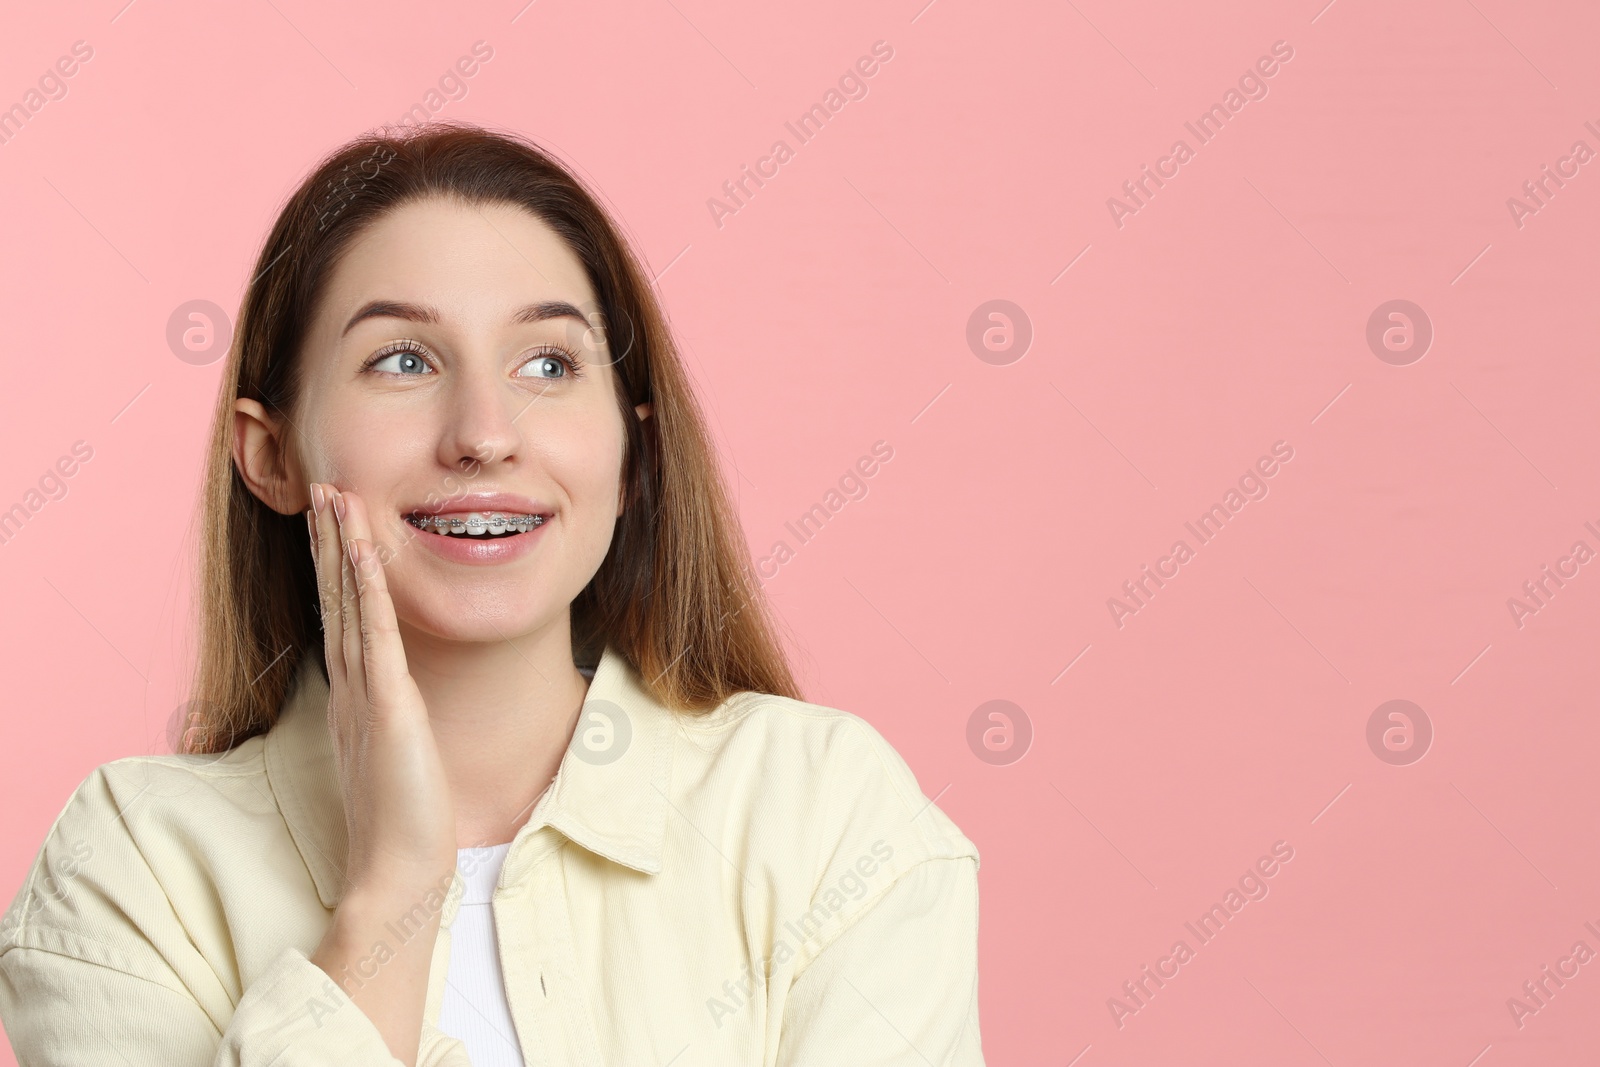 Photo of Portrait of smiling woman with dental braces on pink background. Space for text